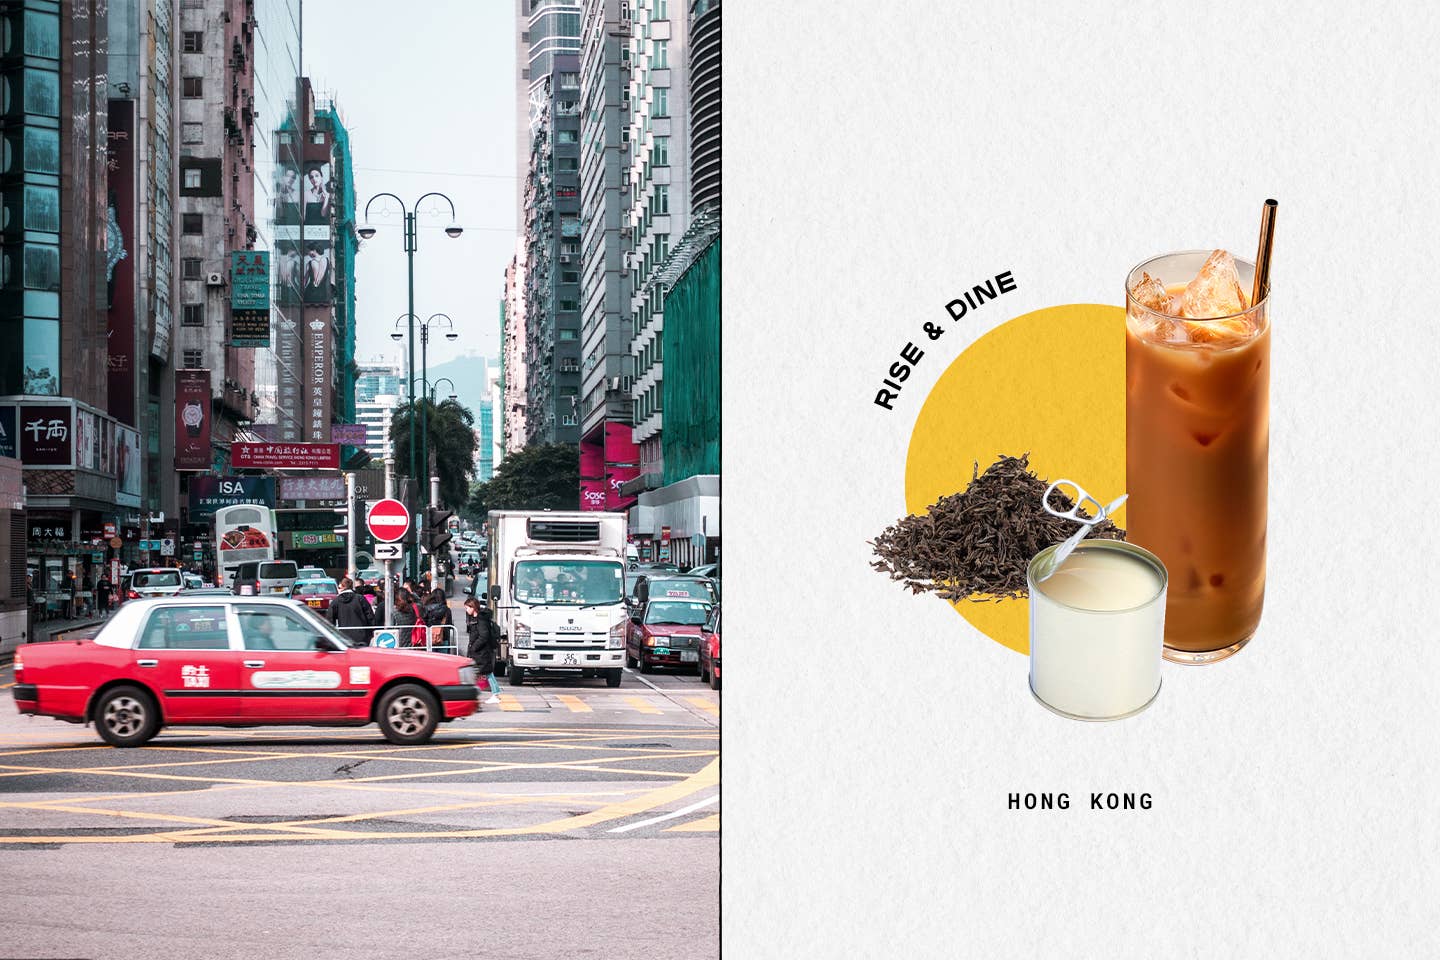 These Humble Diners Embody the Unique Hybridized Culture of Hong Kong